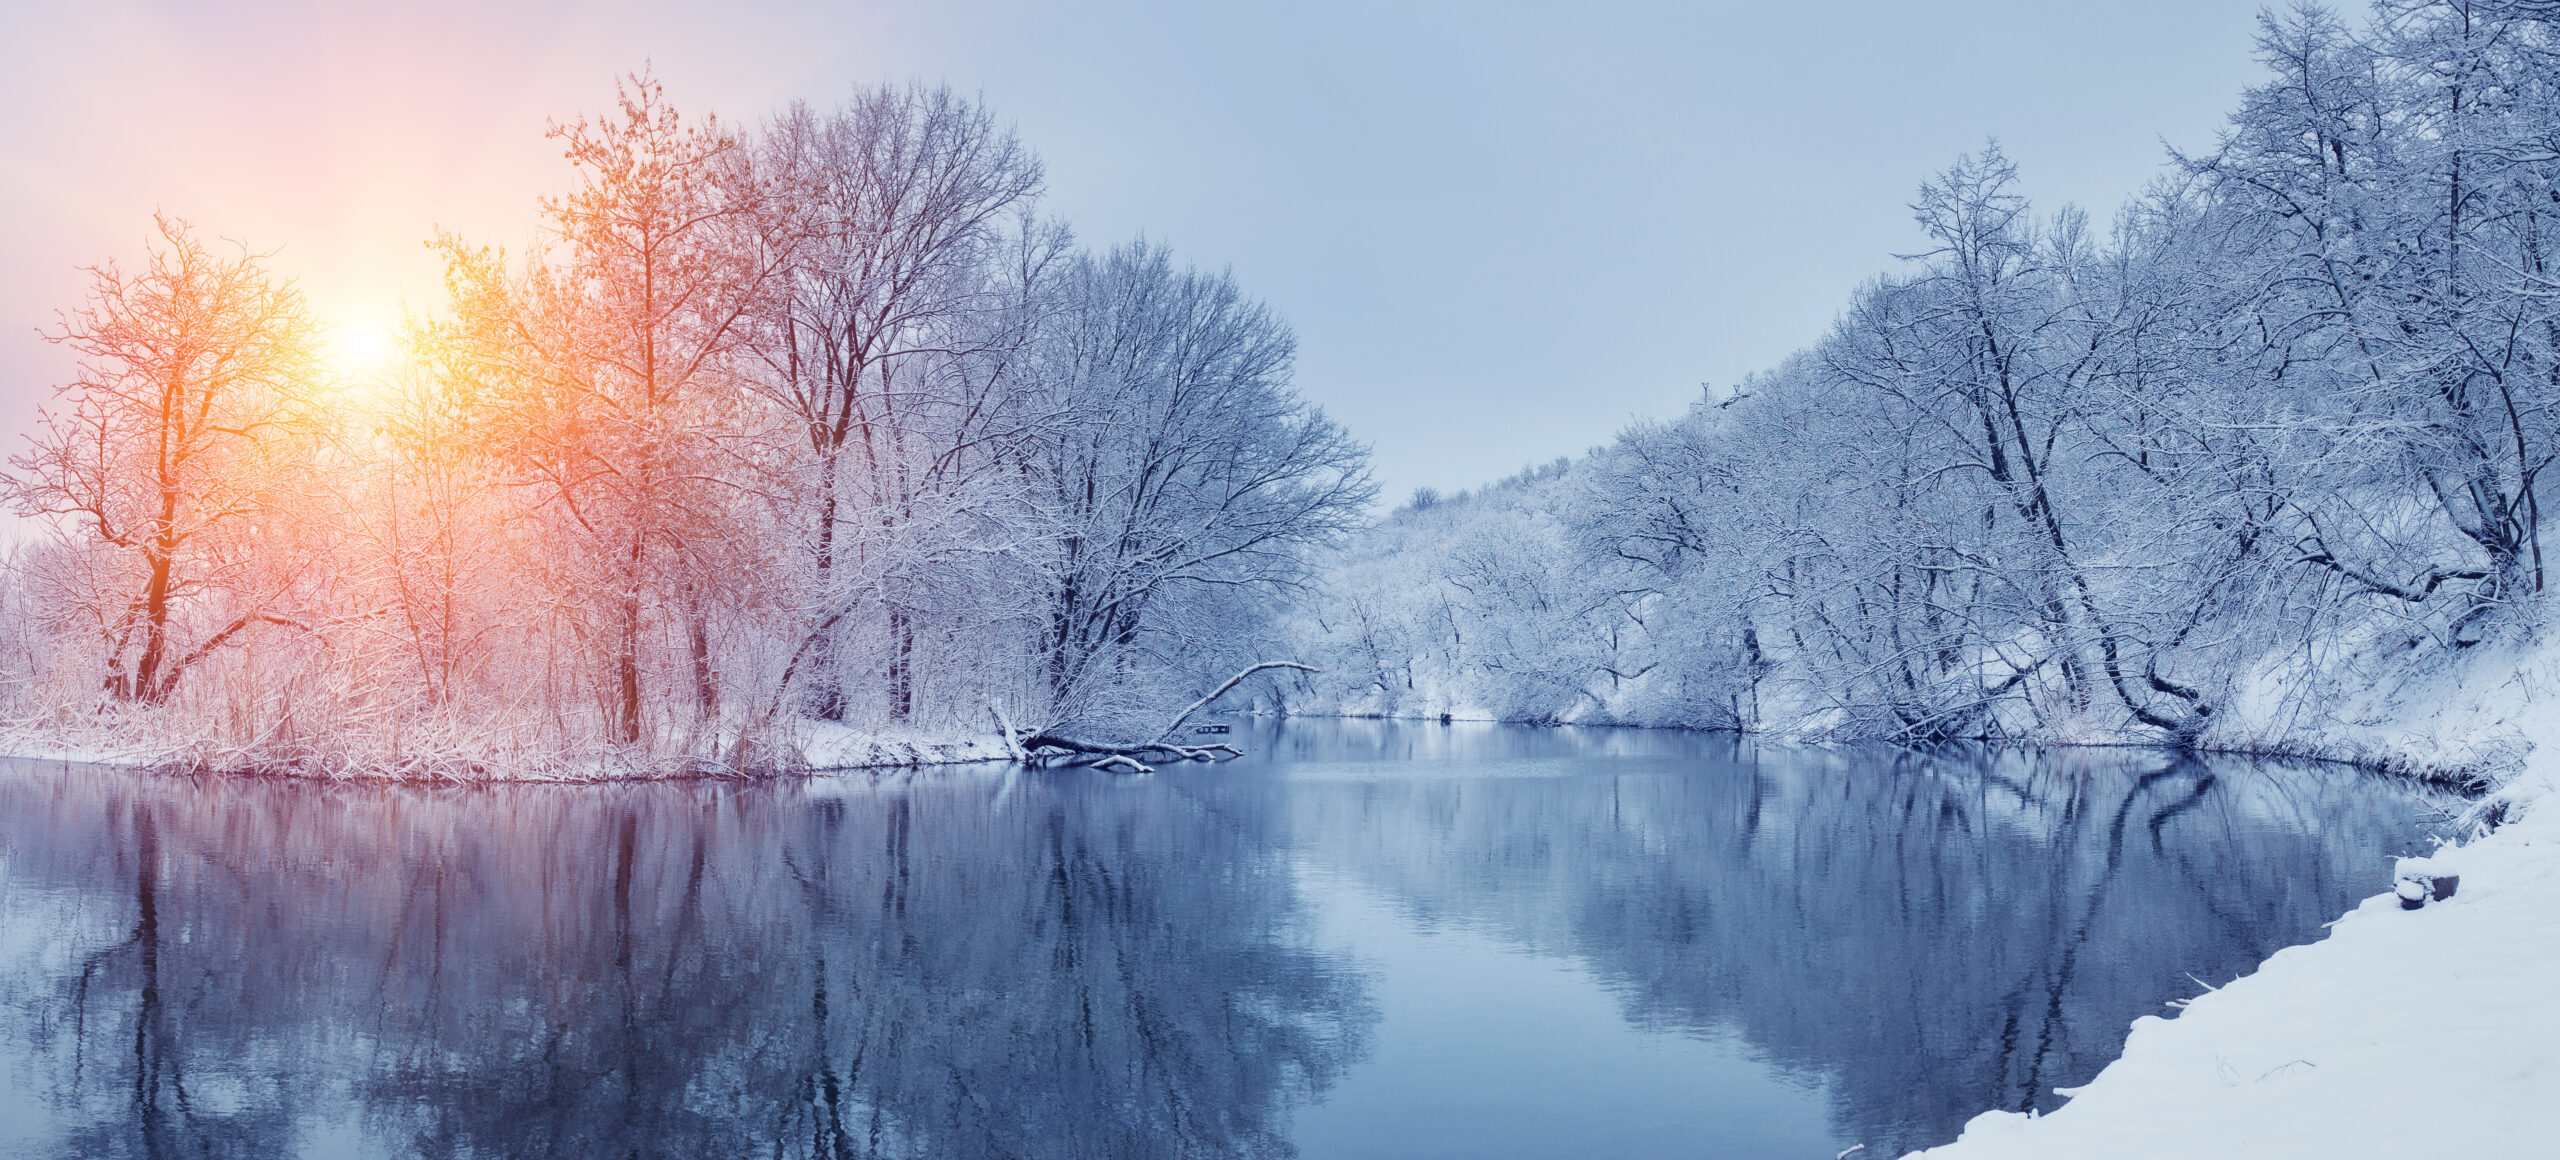 Winter forest scene with lake in foreground and sunset in back